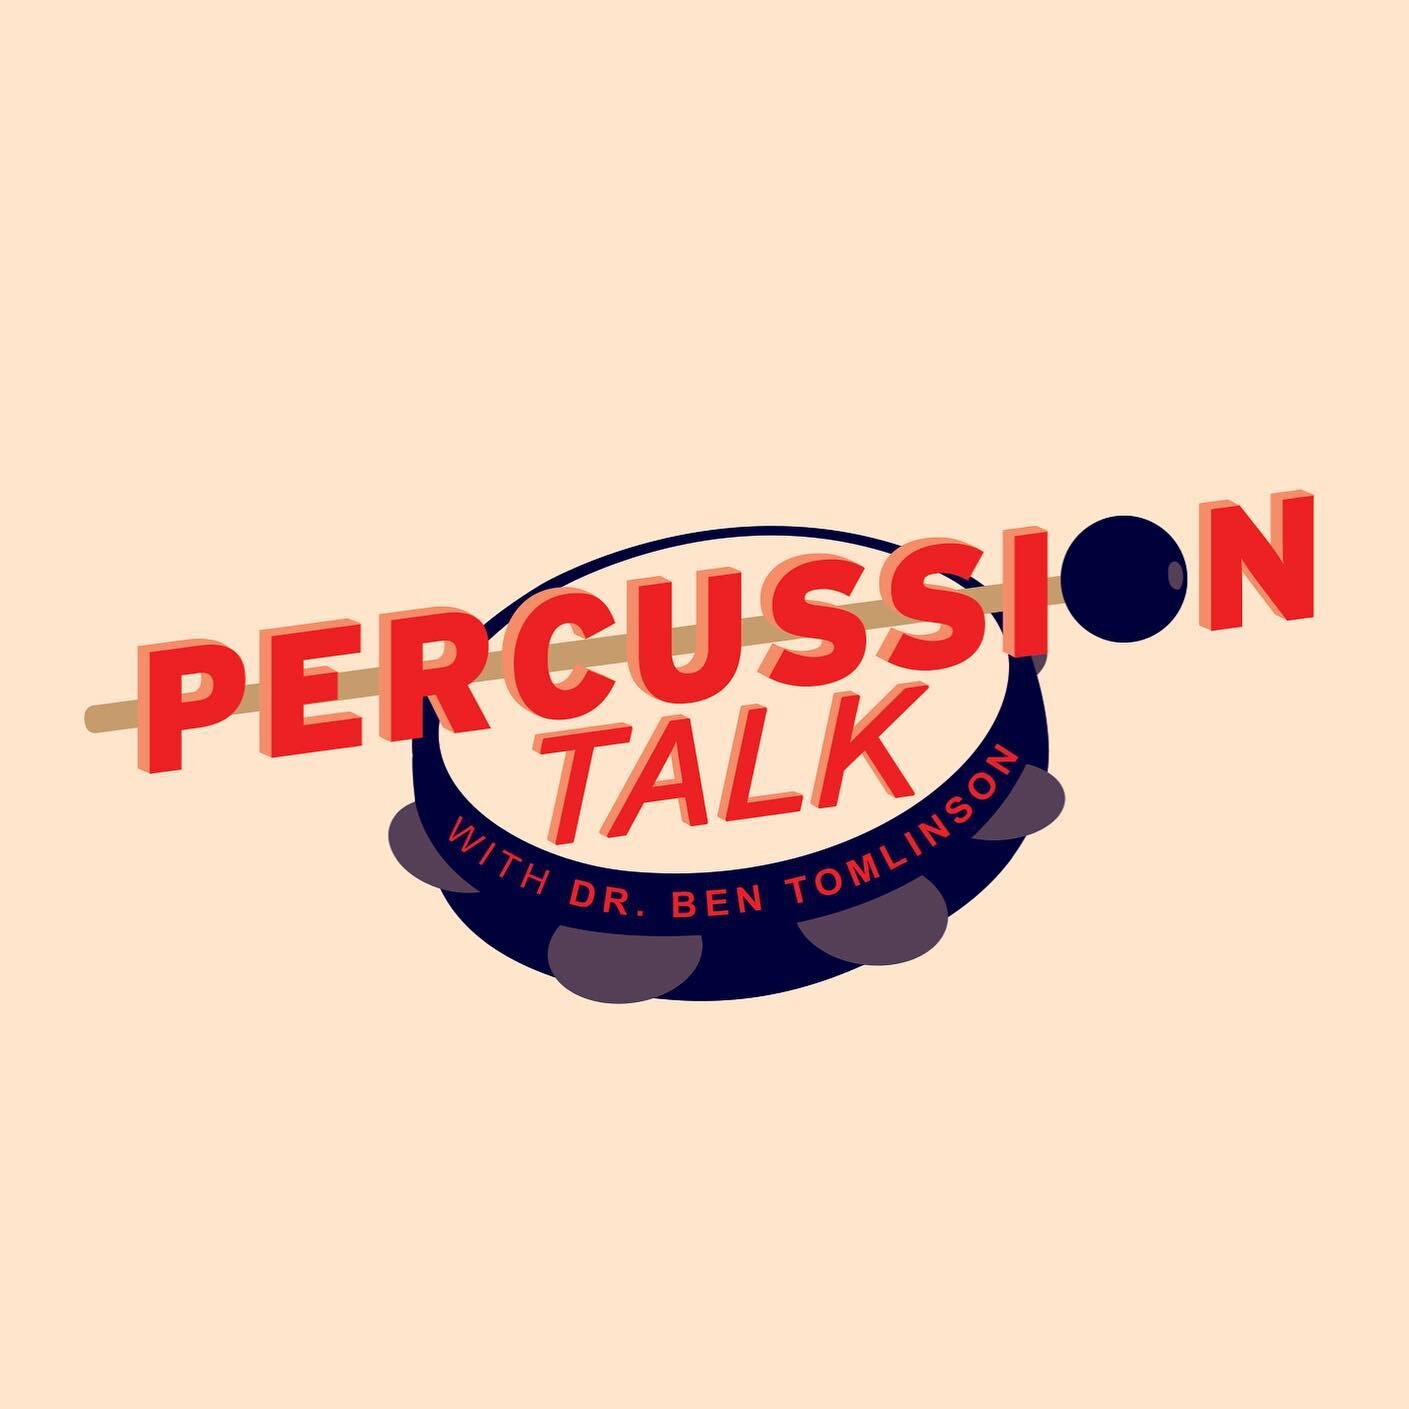 Excited to debut a new look for my blog in a new Percussion Talk post! @jb.grafiks really knocked this logo out of the park, and I&rsquo;m really happy where we ended up. 

In this new post, I share some tips and tricks about mallet selection, and so